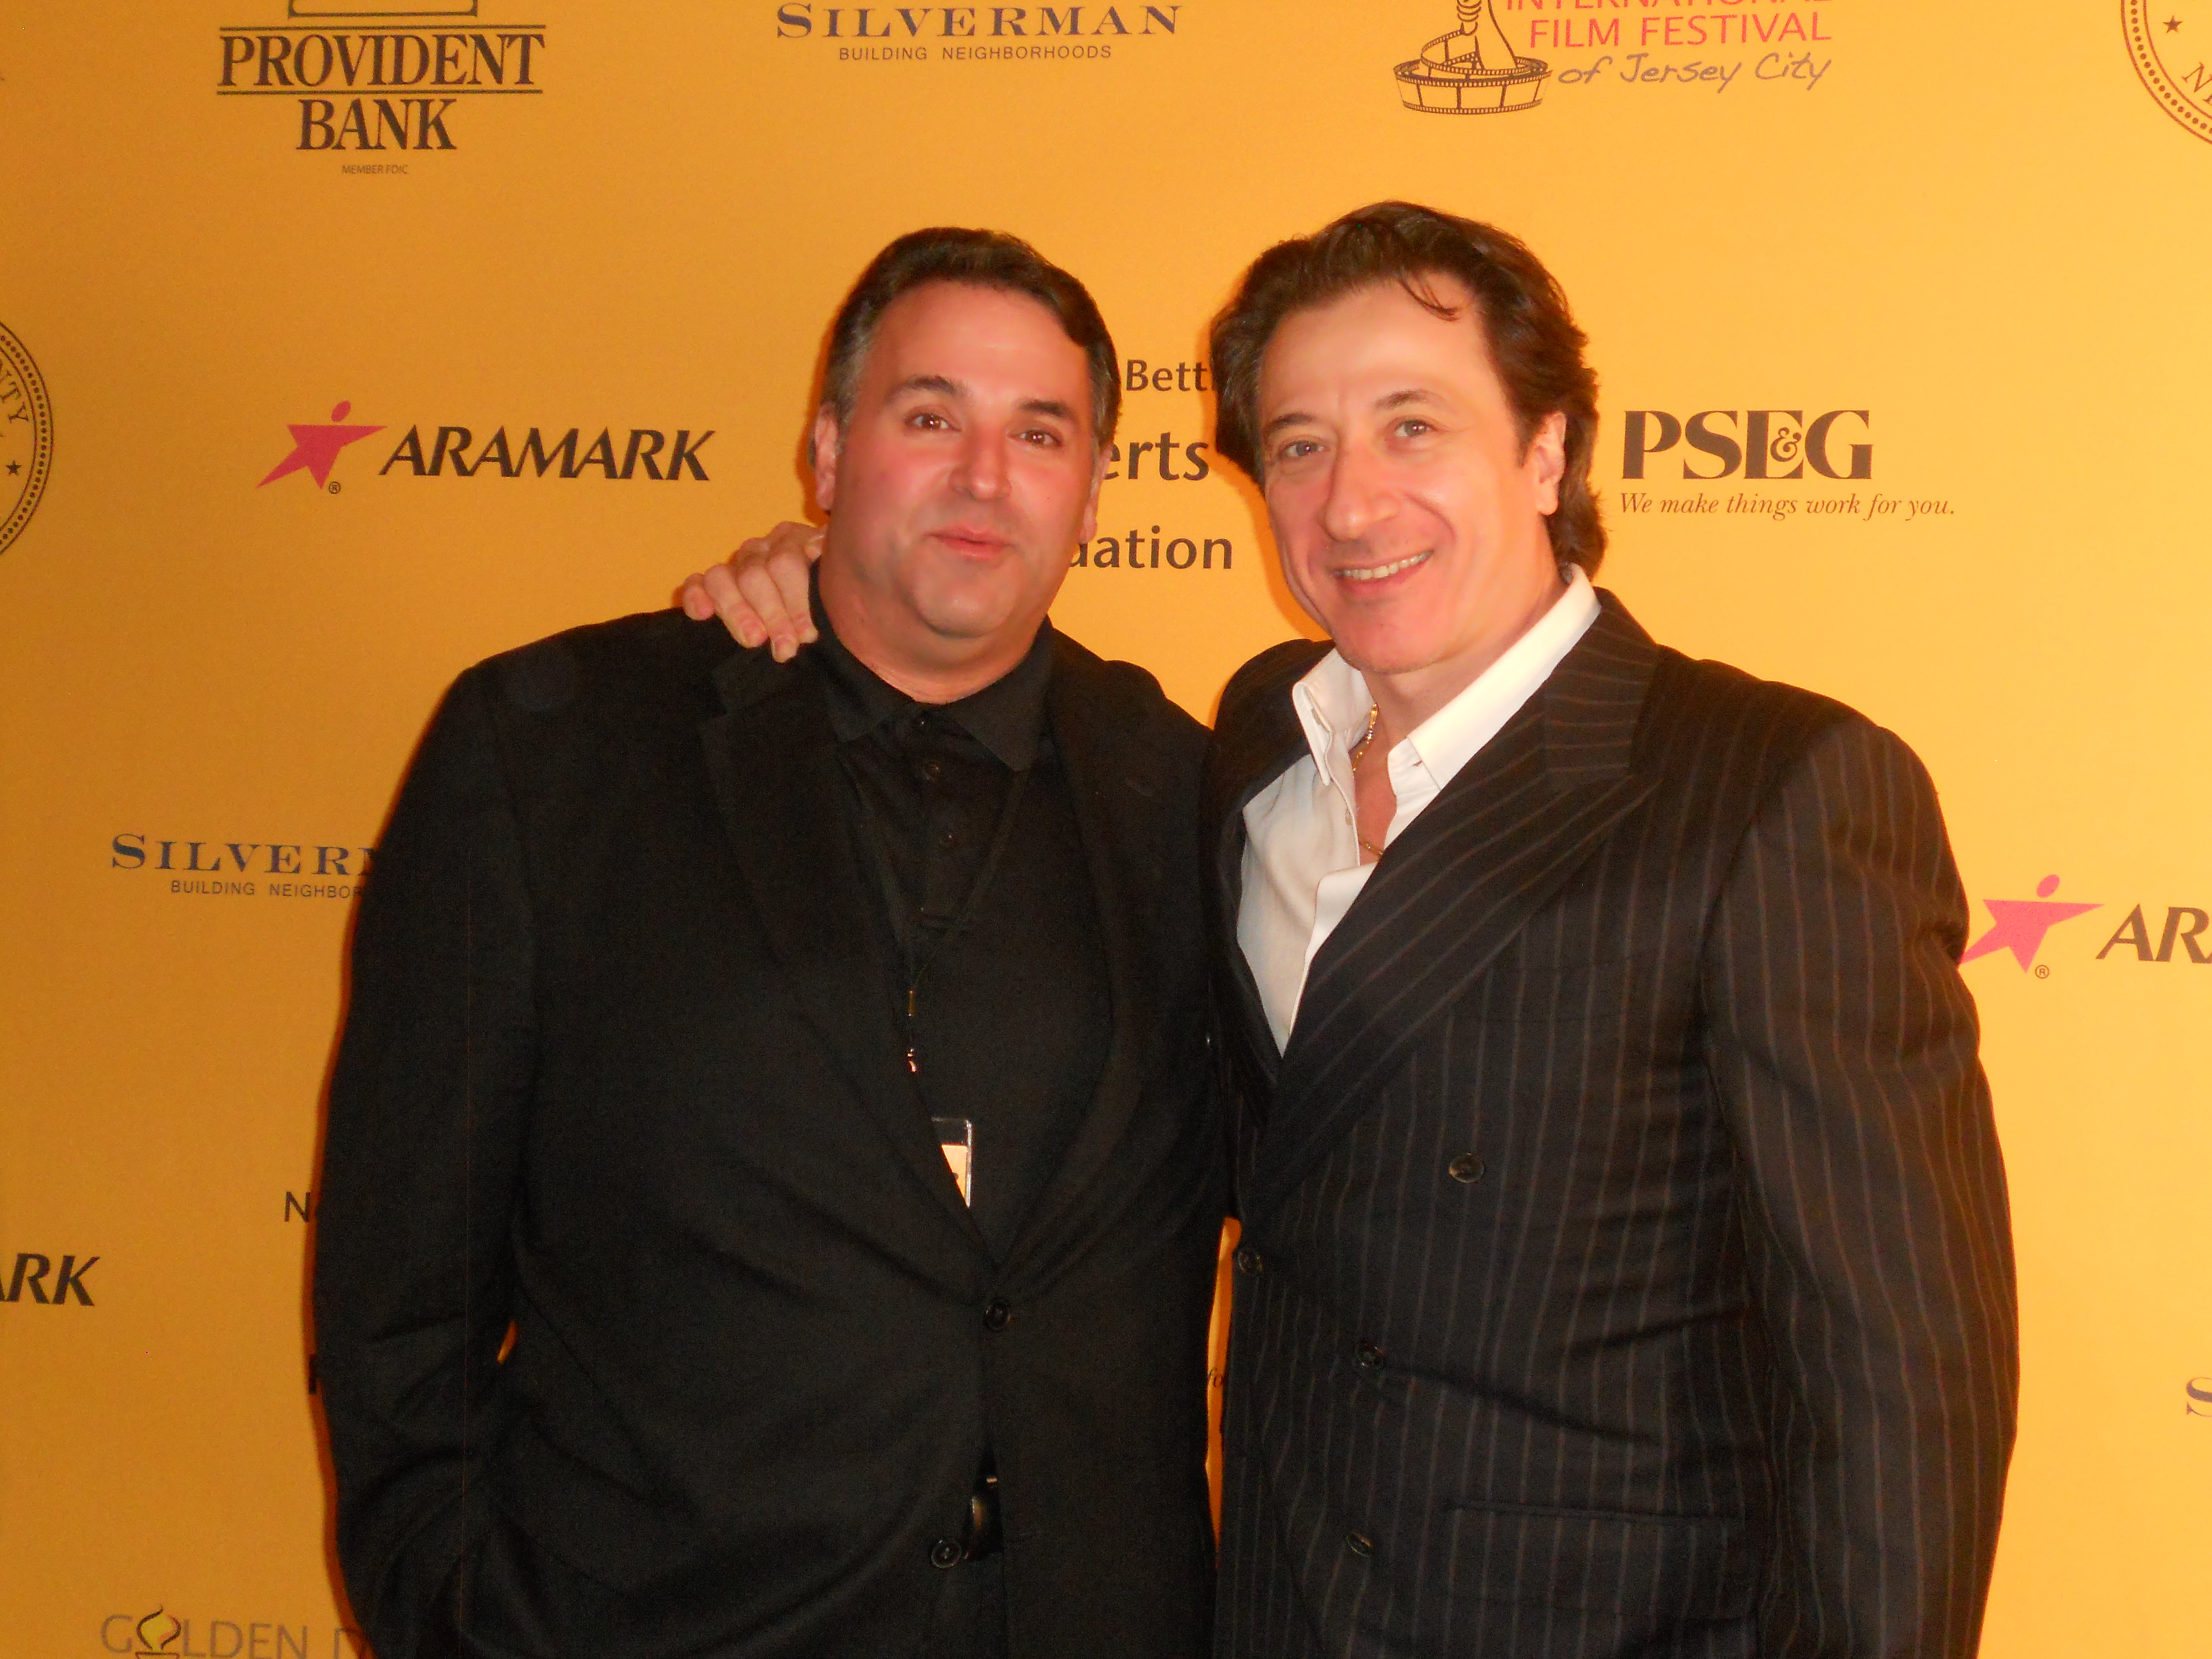 Award-Winning Writer-Director/Producer Sam Borowski (L) with Award-Winning Actor/Director Federico Castelluccio, as the two screened their film, POLLINATION * at the 2012 GOLDEN DOOR INTERNATIONAL FILM FESTIVAL OF JERSEY CITY.